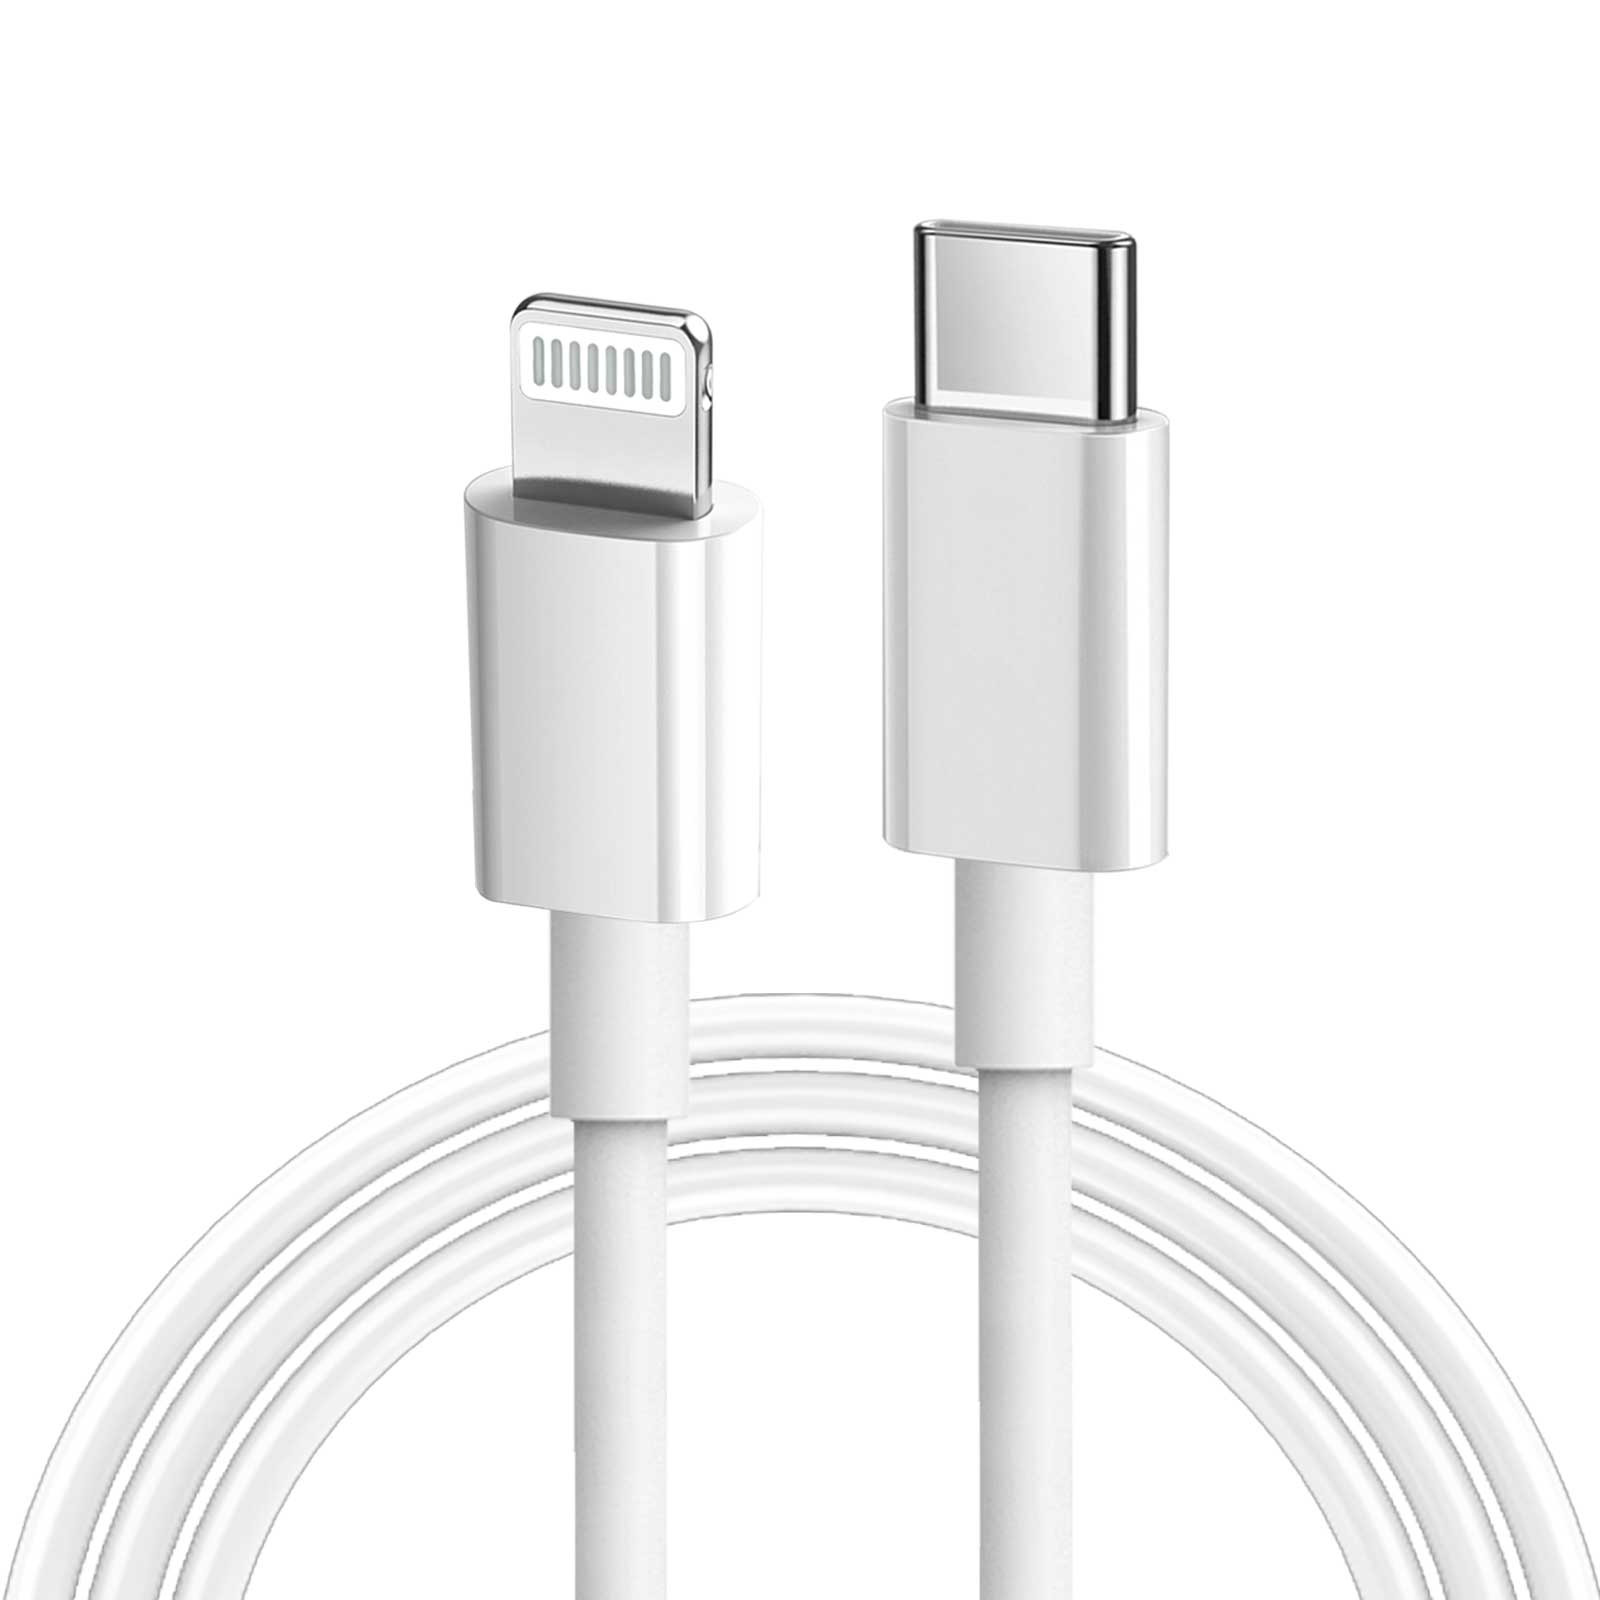 KAL015 C94 Lightning Charger USB C to Lightning Data Cable PD Fast Charger Kompatibilität mit IPhone X